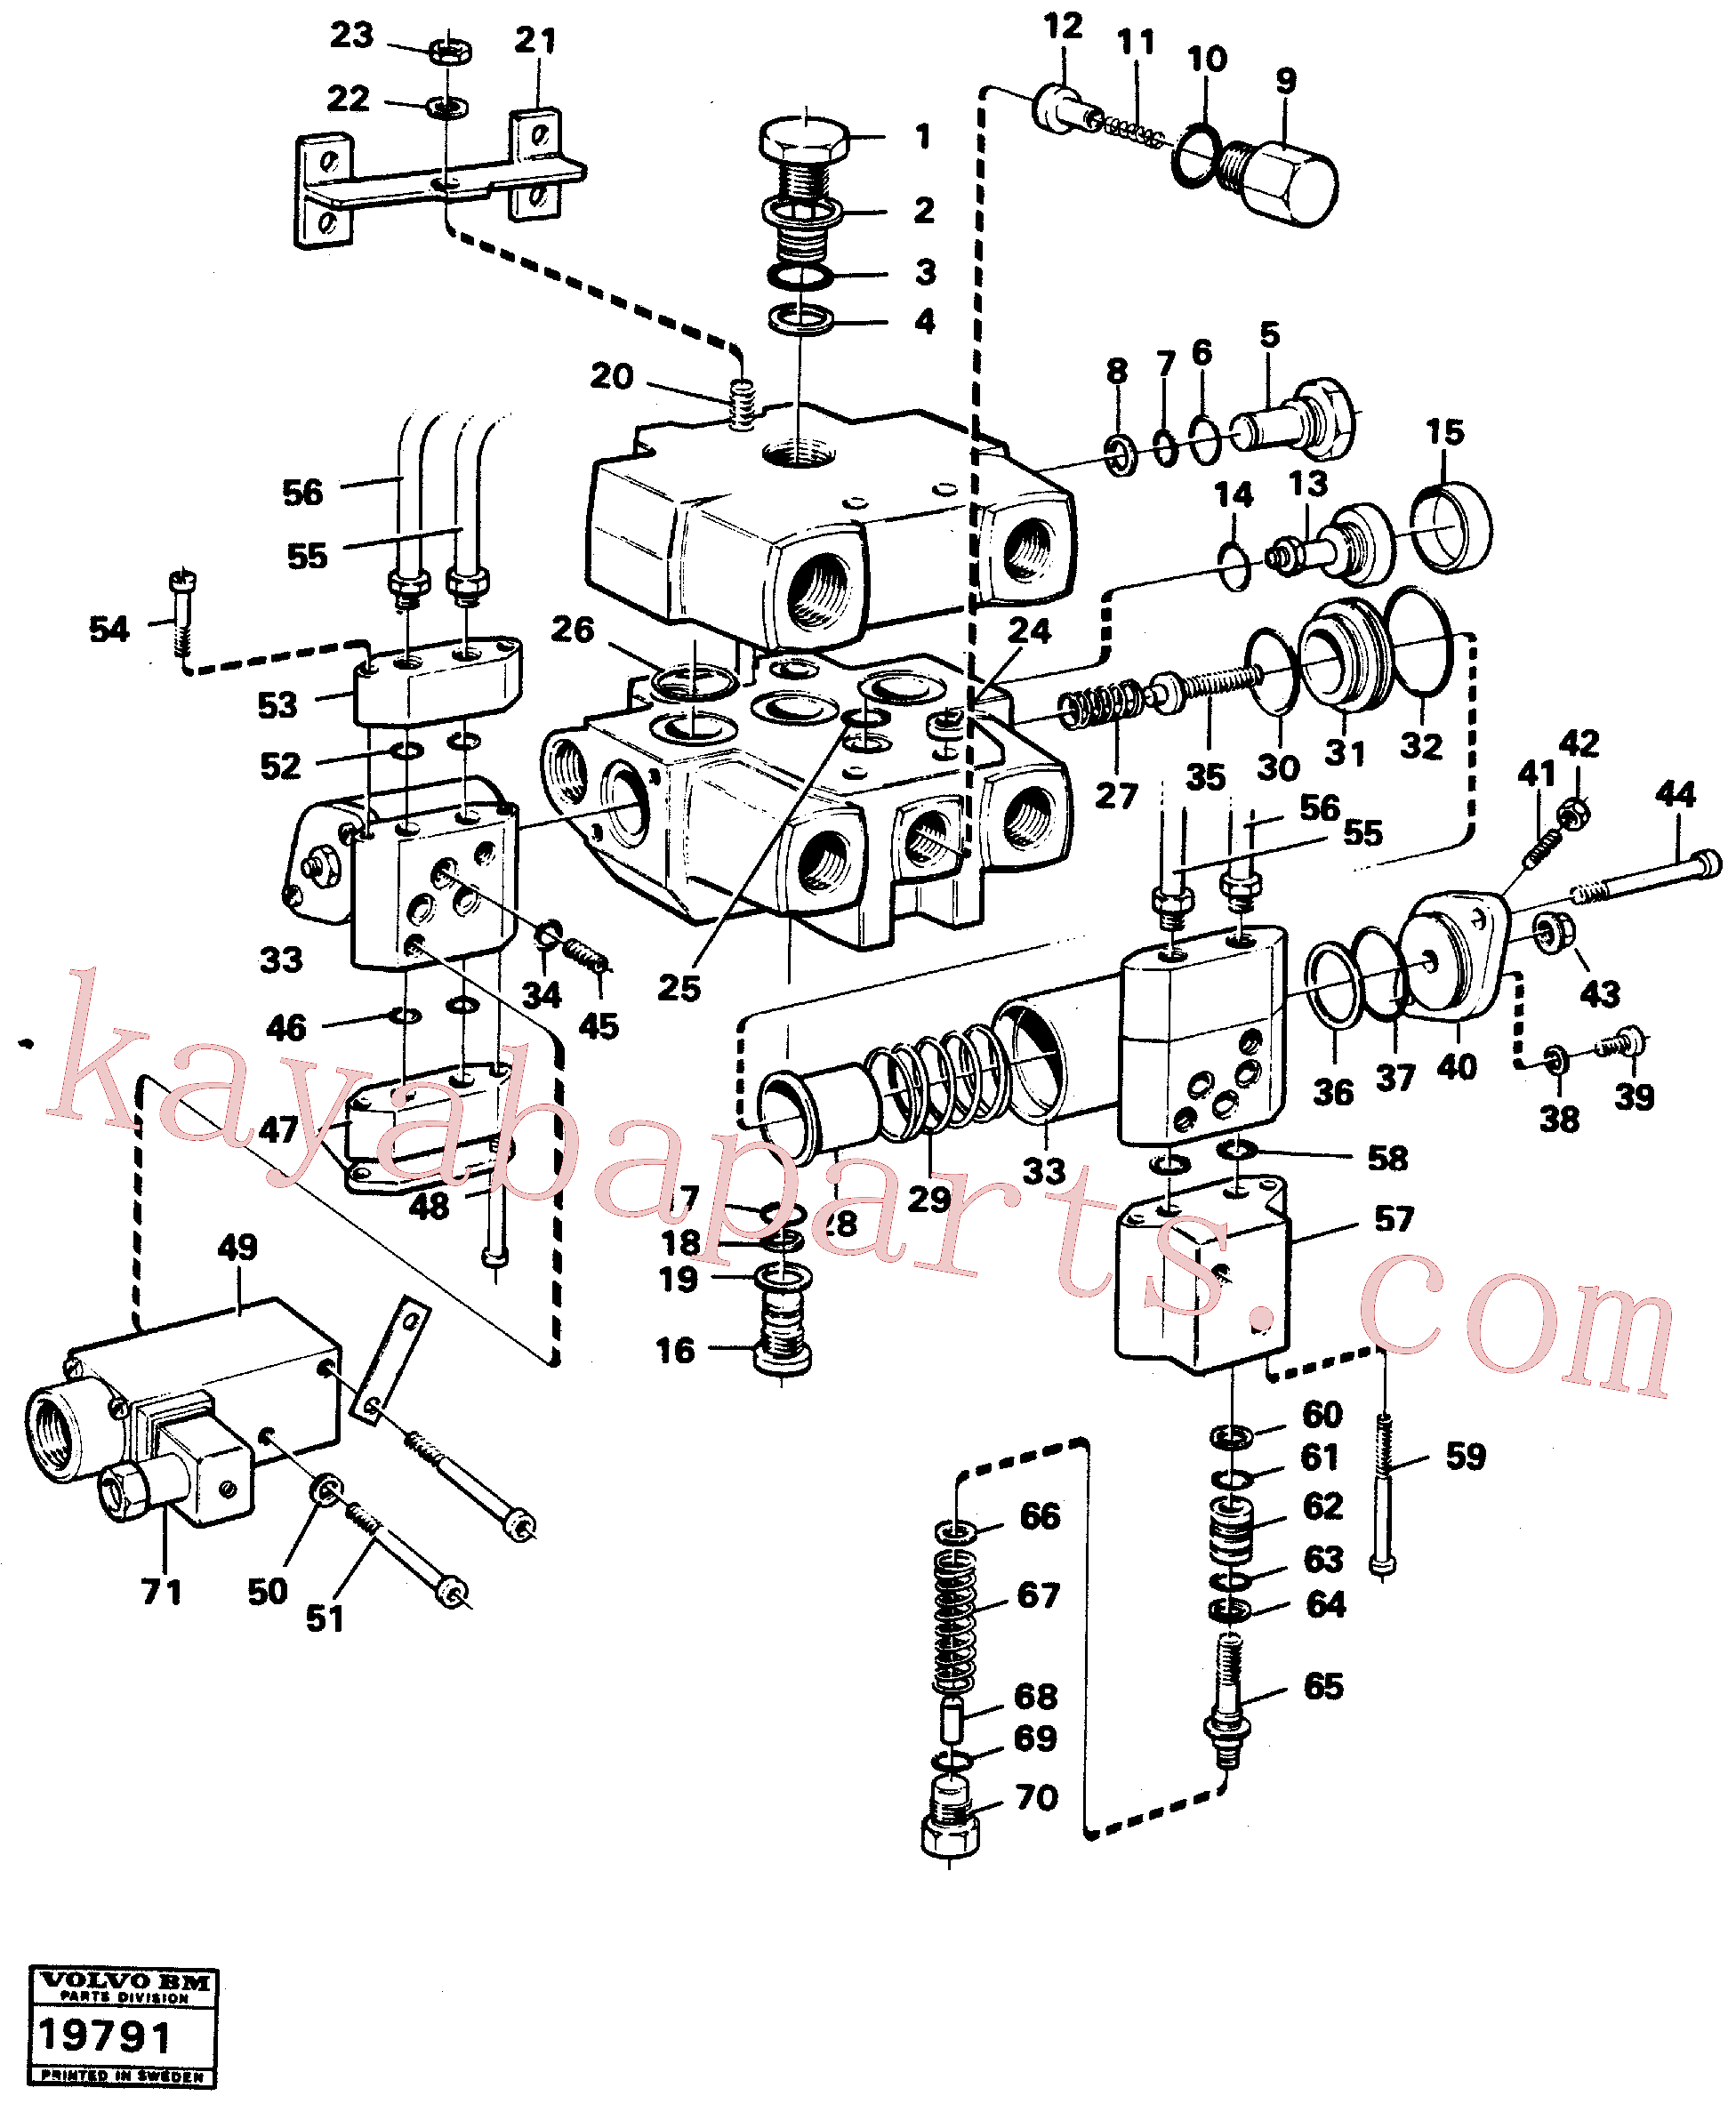 VOE6648876 for Volvo Control valve, lever steering., Control valve, comfort drive control(19791 assembly)